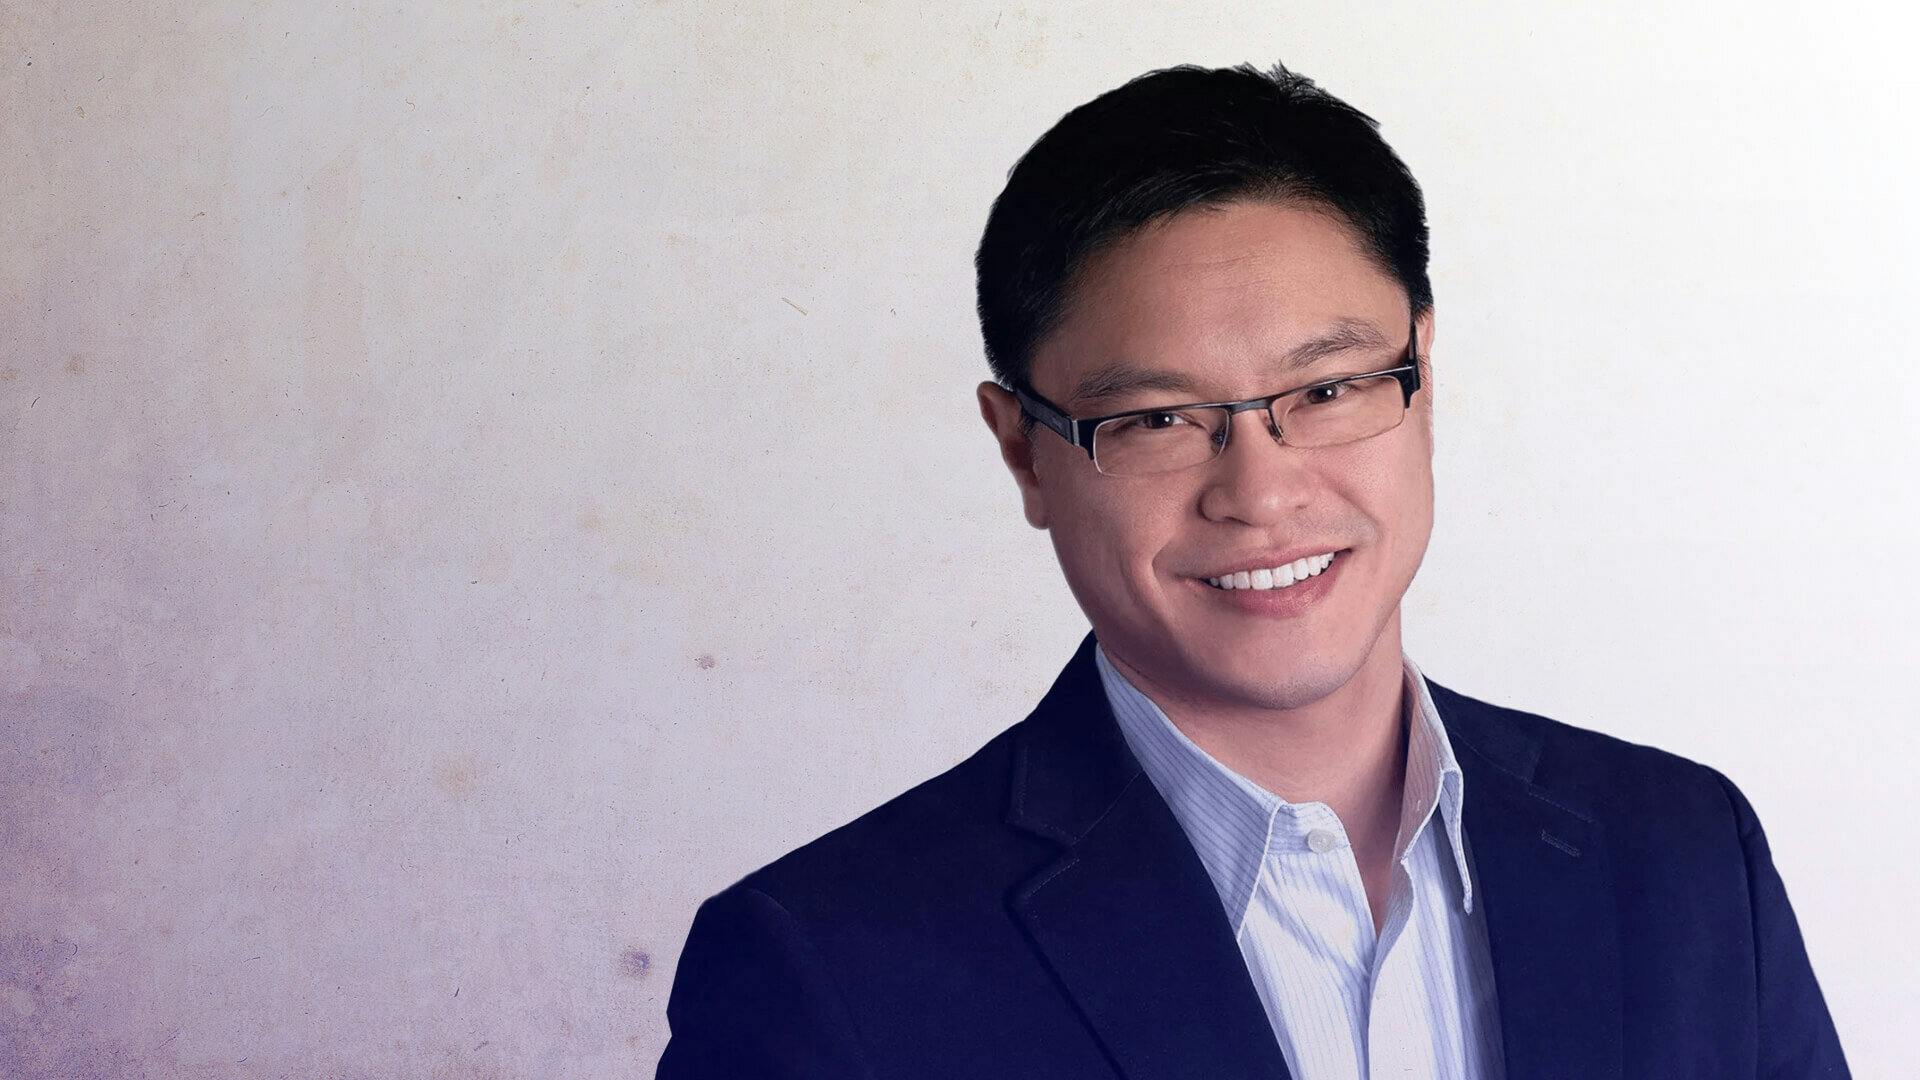 Who Is Dr. Jason Fung?